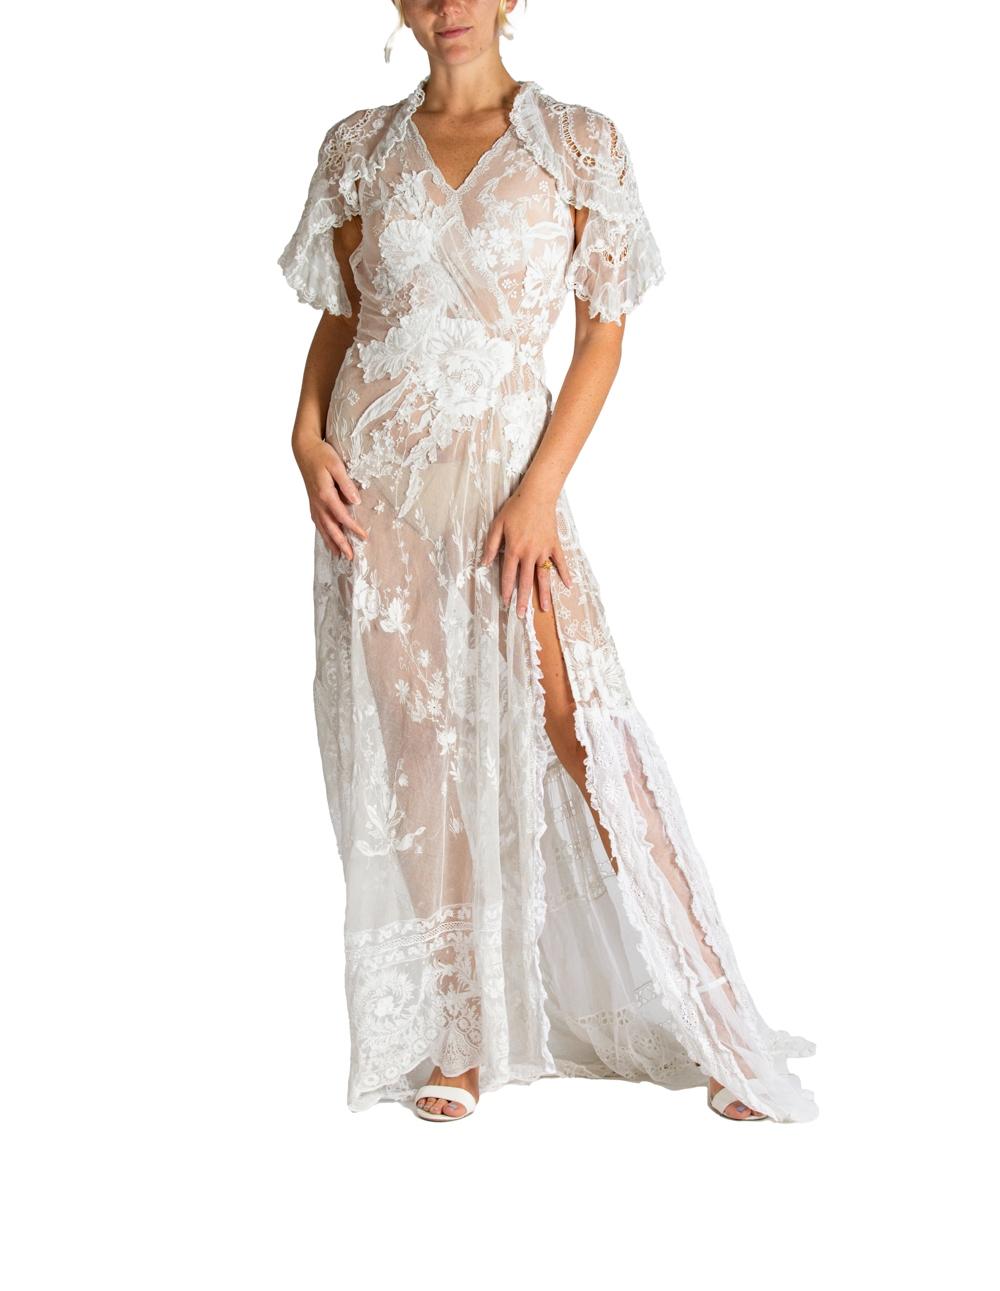 MORPHEW ATELIER White Cotton Embroidered Antique Net Lace Gown With Cut-Out Back In New Condition For Sale In New York, NY